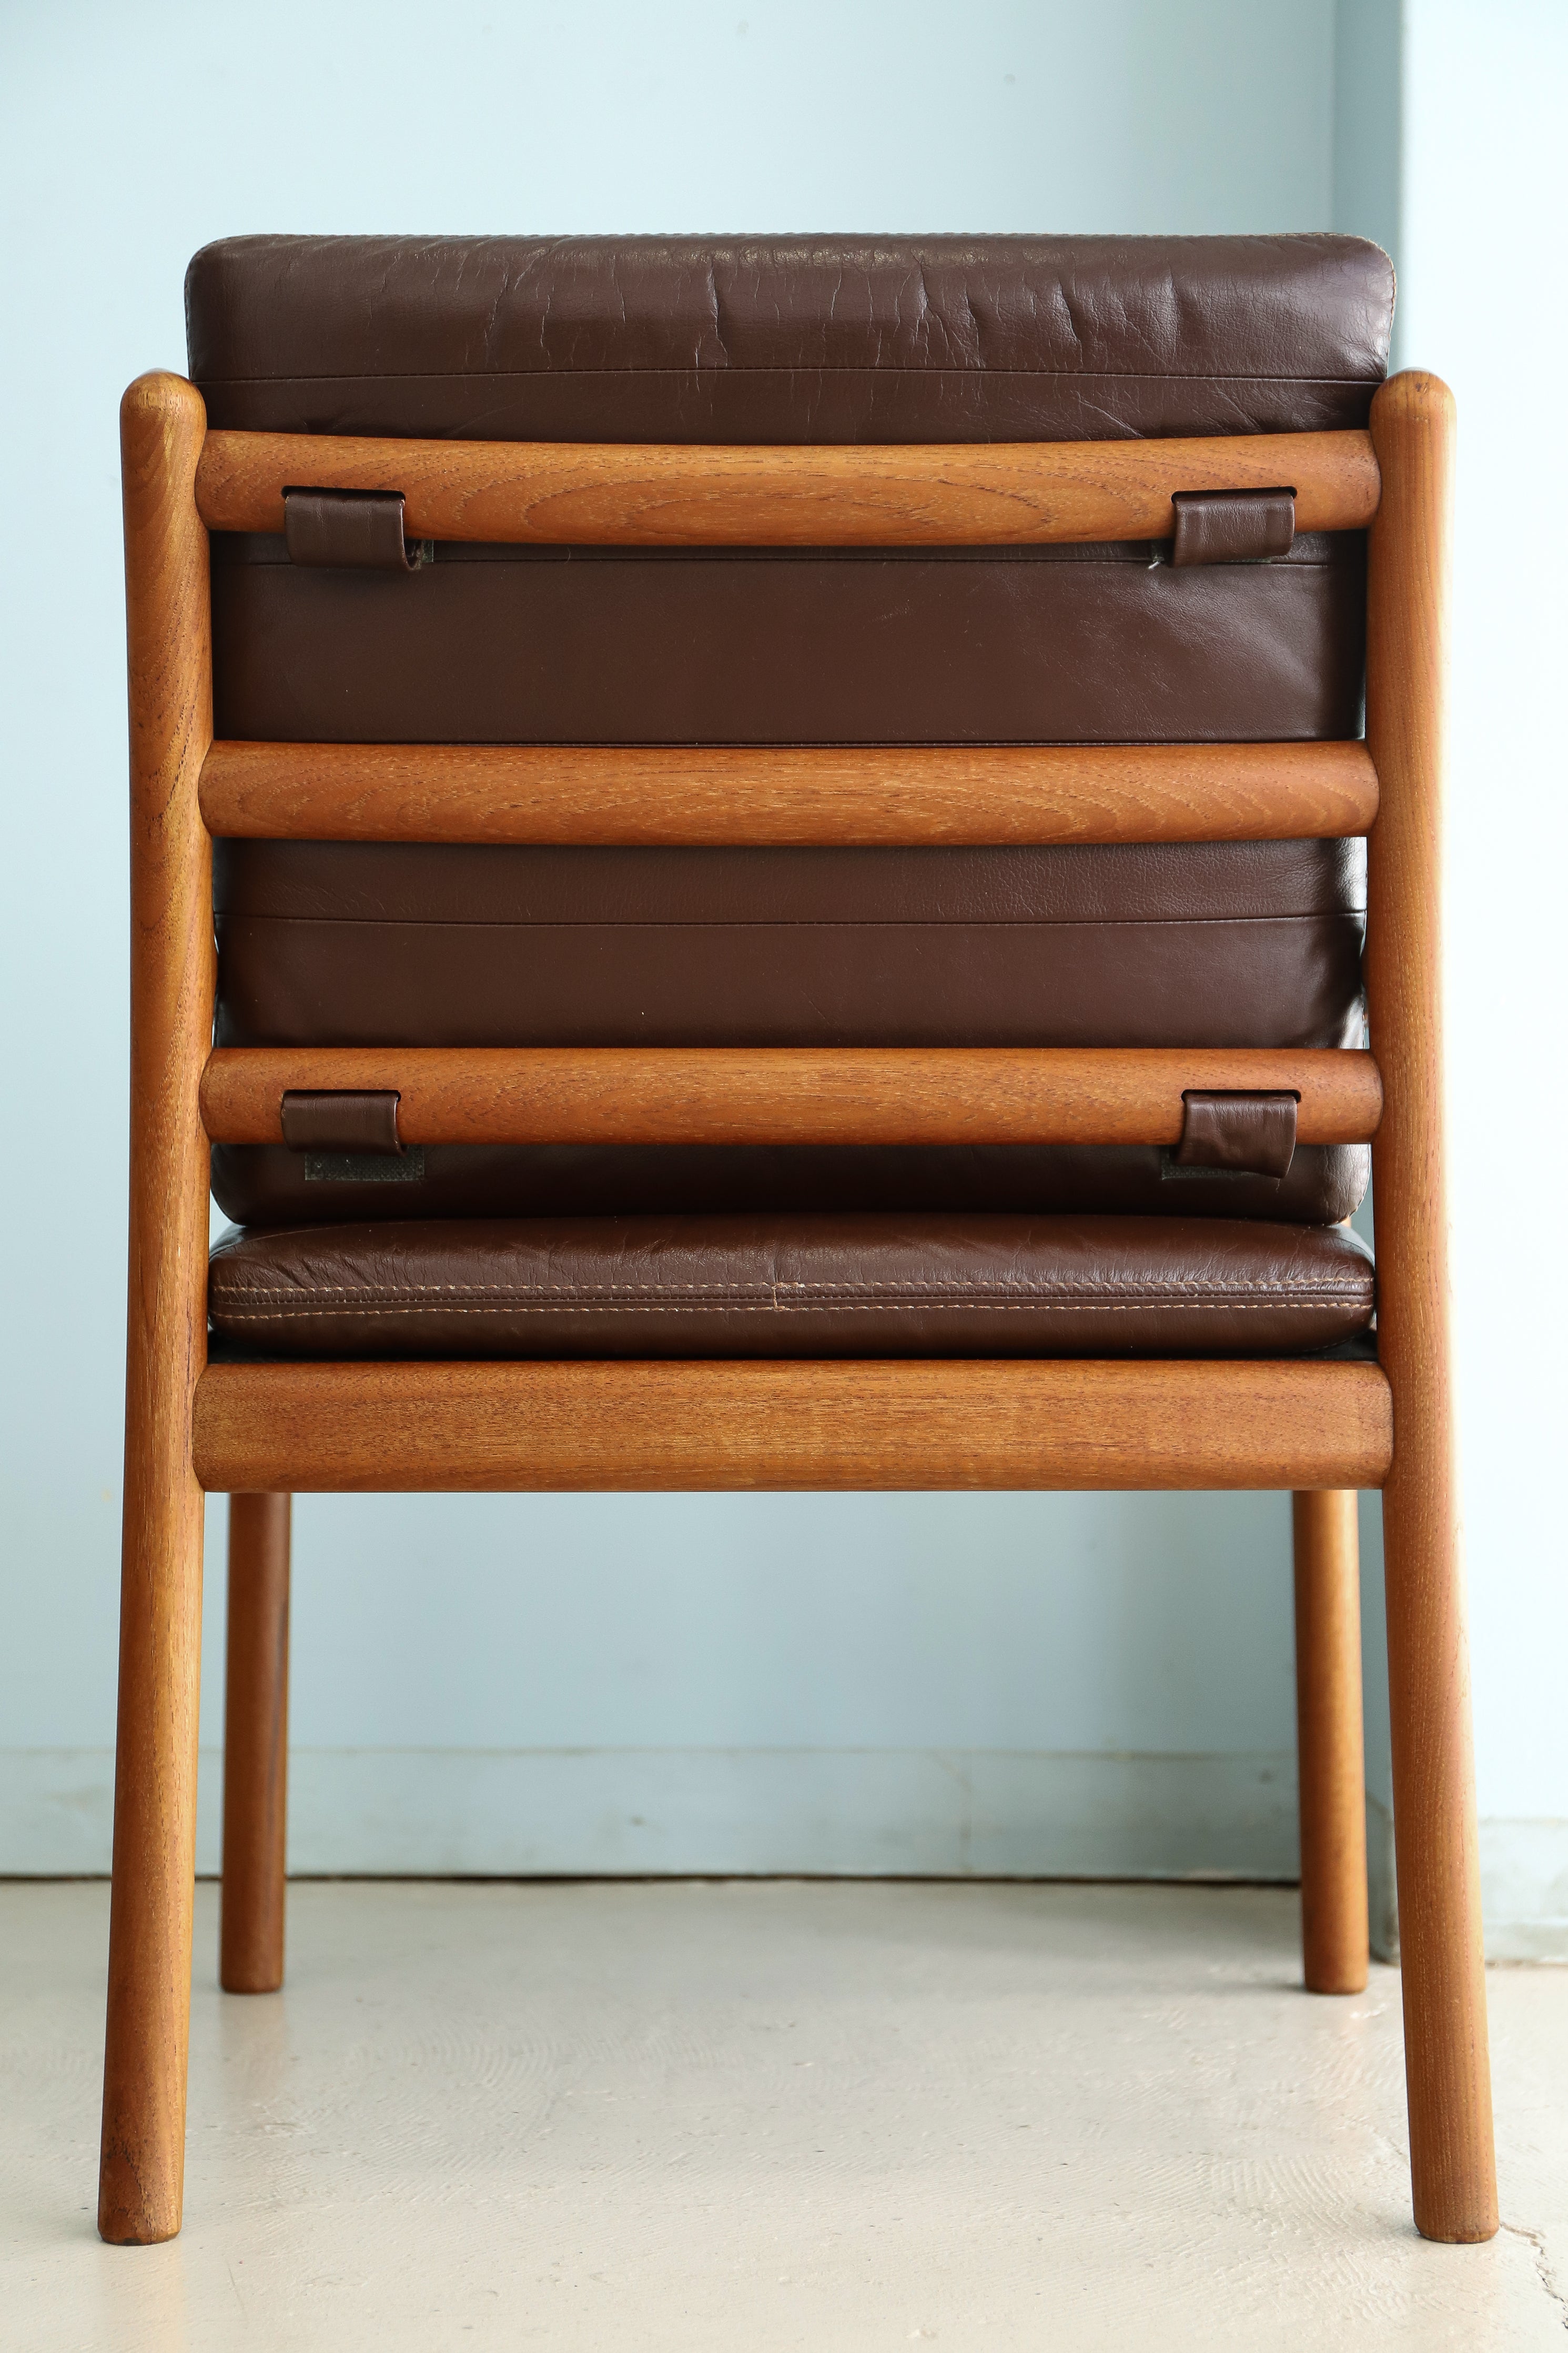 Japanese Vintage HITA CRAFTS Arm Chair Teakwood/日田工芸 アームチェア 椅子 チーク材 ジャパンヴィンテージ